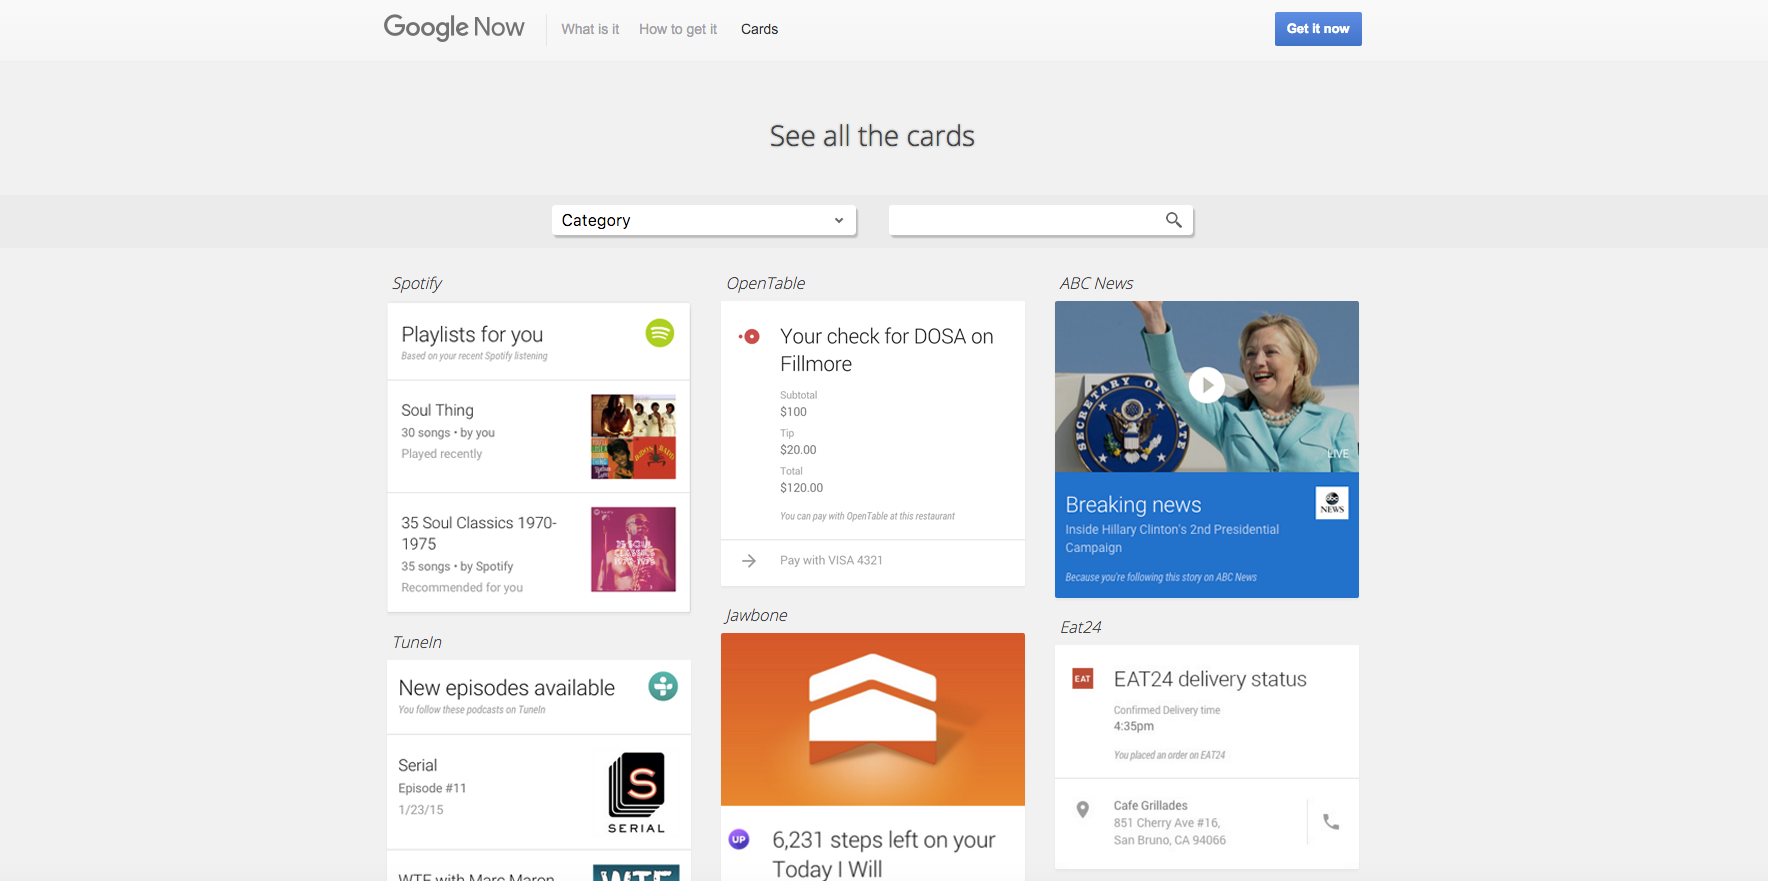 Google Now Card layout